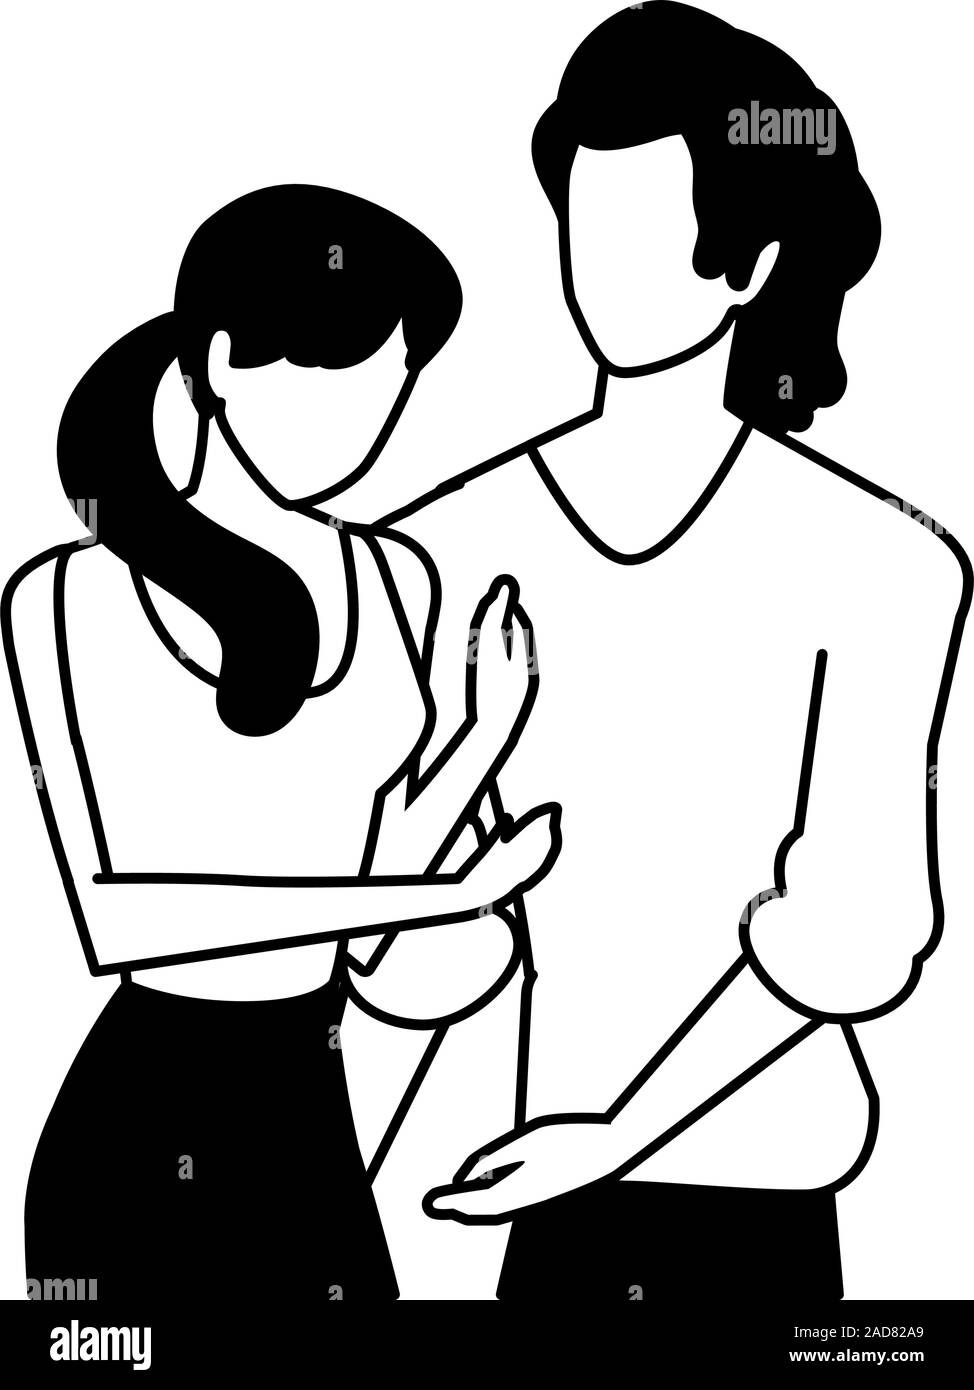 couple in love, man and woman showing affection vector illustration ...